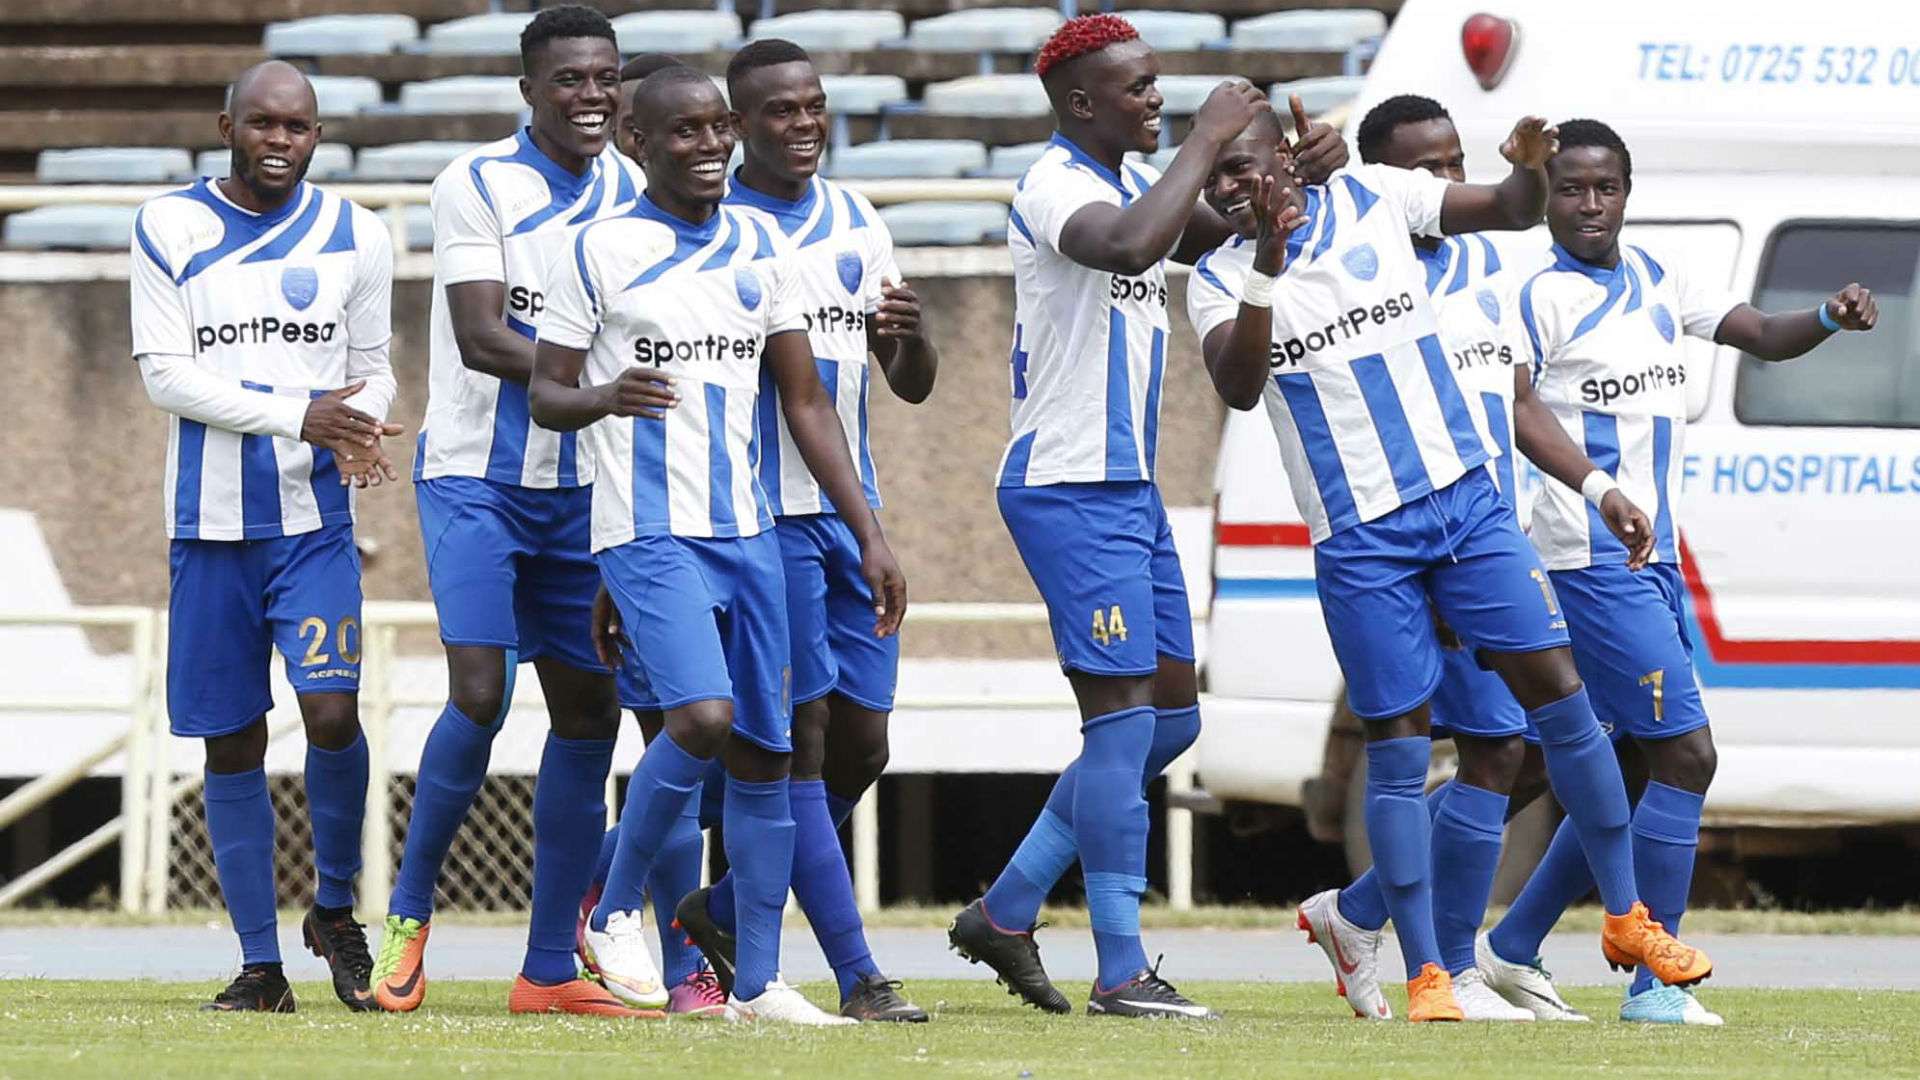 Paul Were Whyonne Isuza and David Ochieng of AFC Leopards.